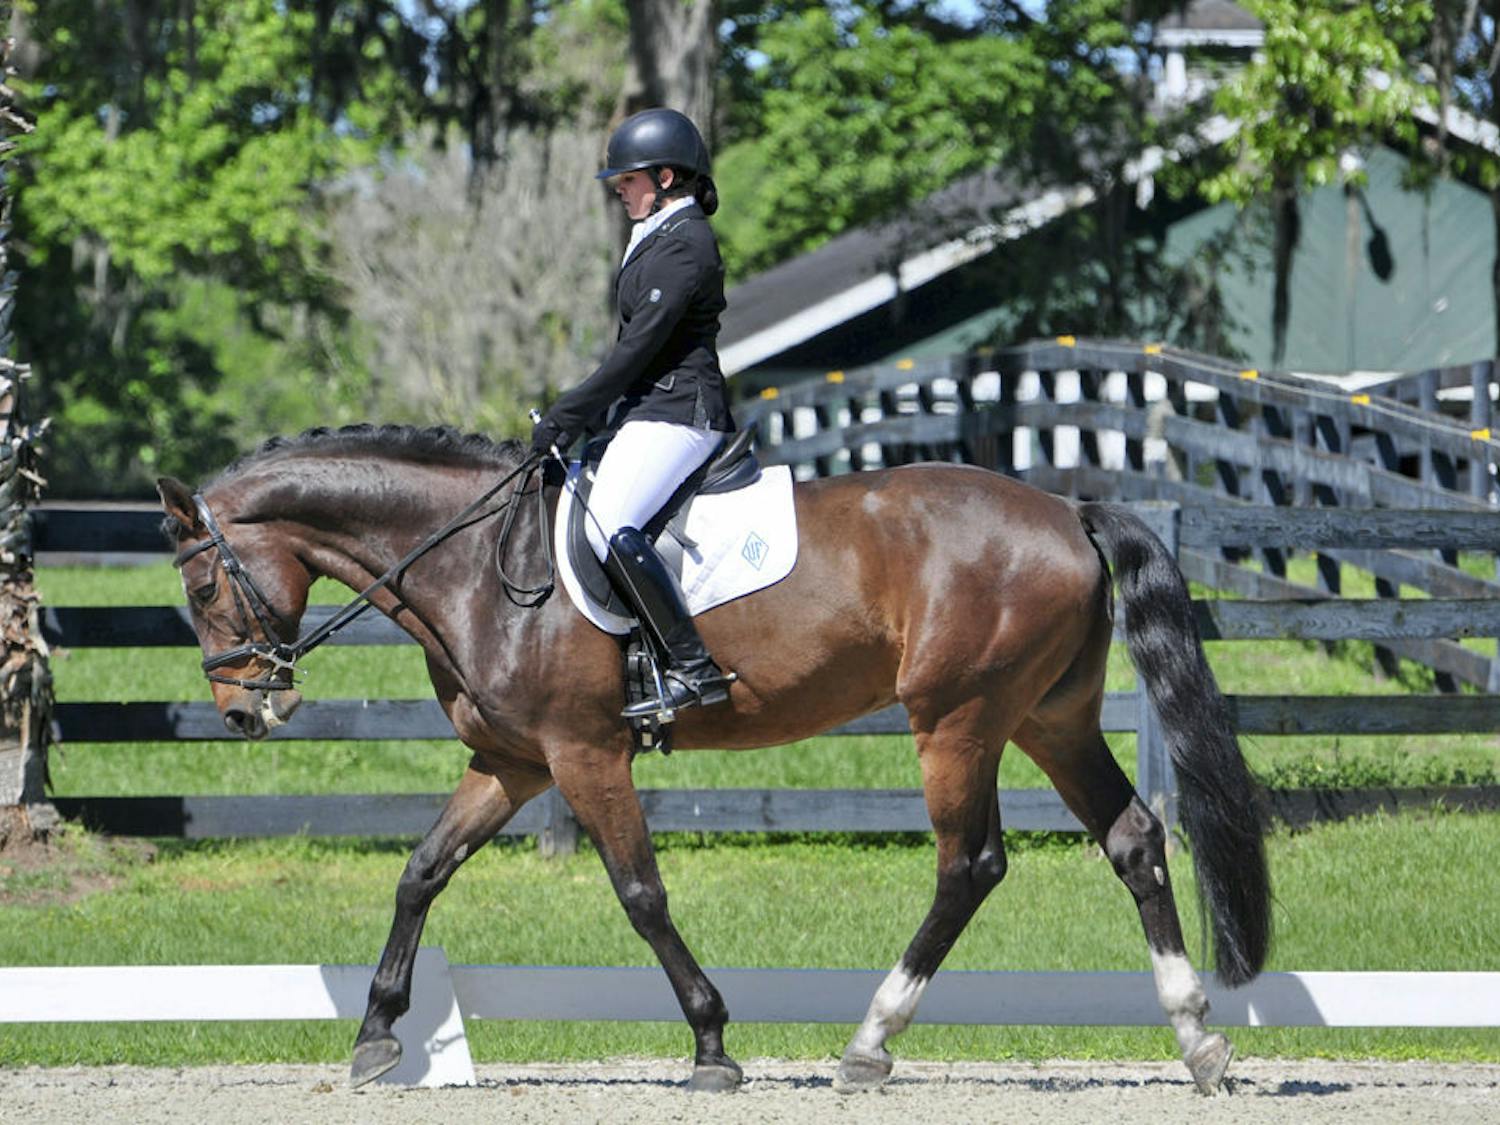 Alexis Rossetti, a 19-year-old UF political science and international studies sophomore, is one of five UF students who will compete in the Intercollegiate Dressage Association’s 2016 National Championship in New Jersey on Saturday and Sunday.